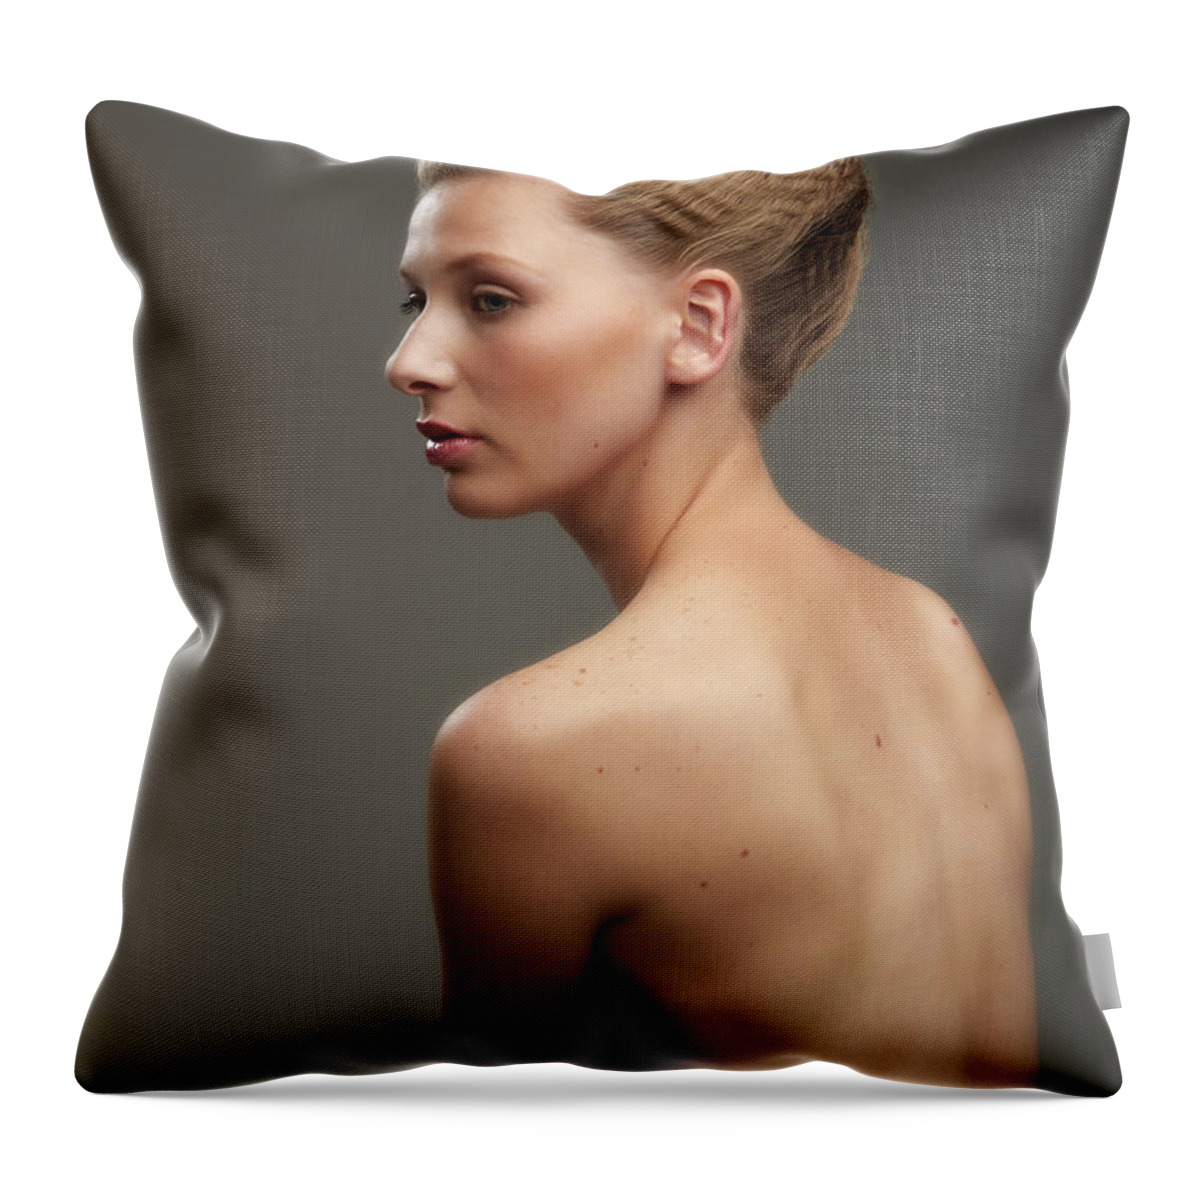 Tranquility Throw Pillow featuring the photograph Bare Back Girl With Hair Tied Up by Smith Collection